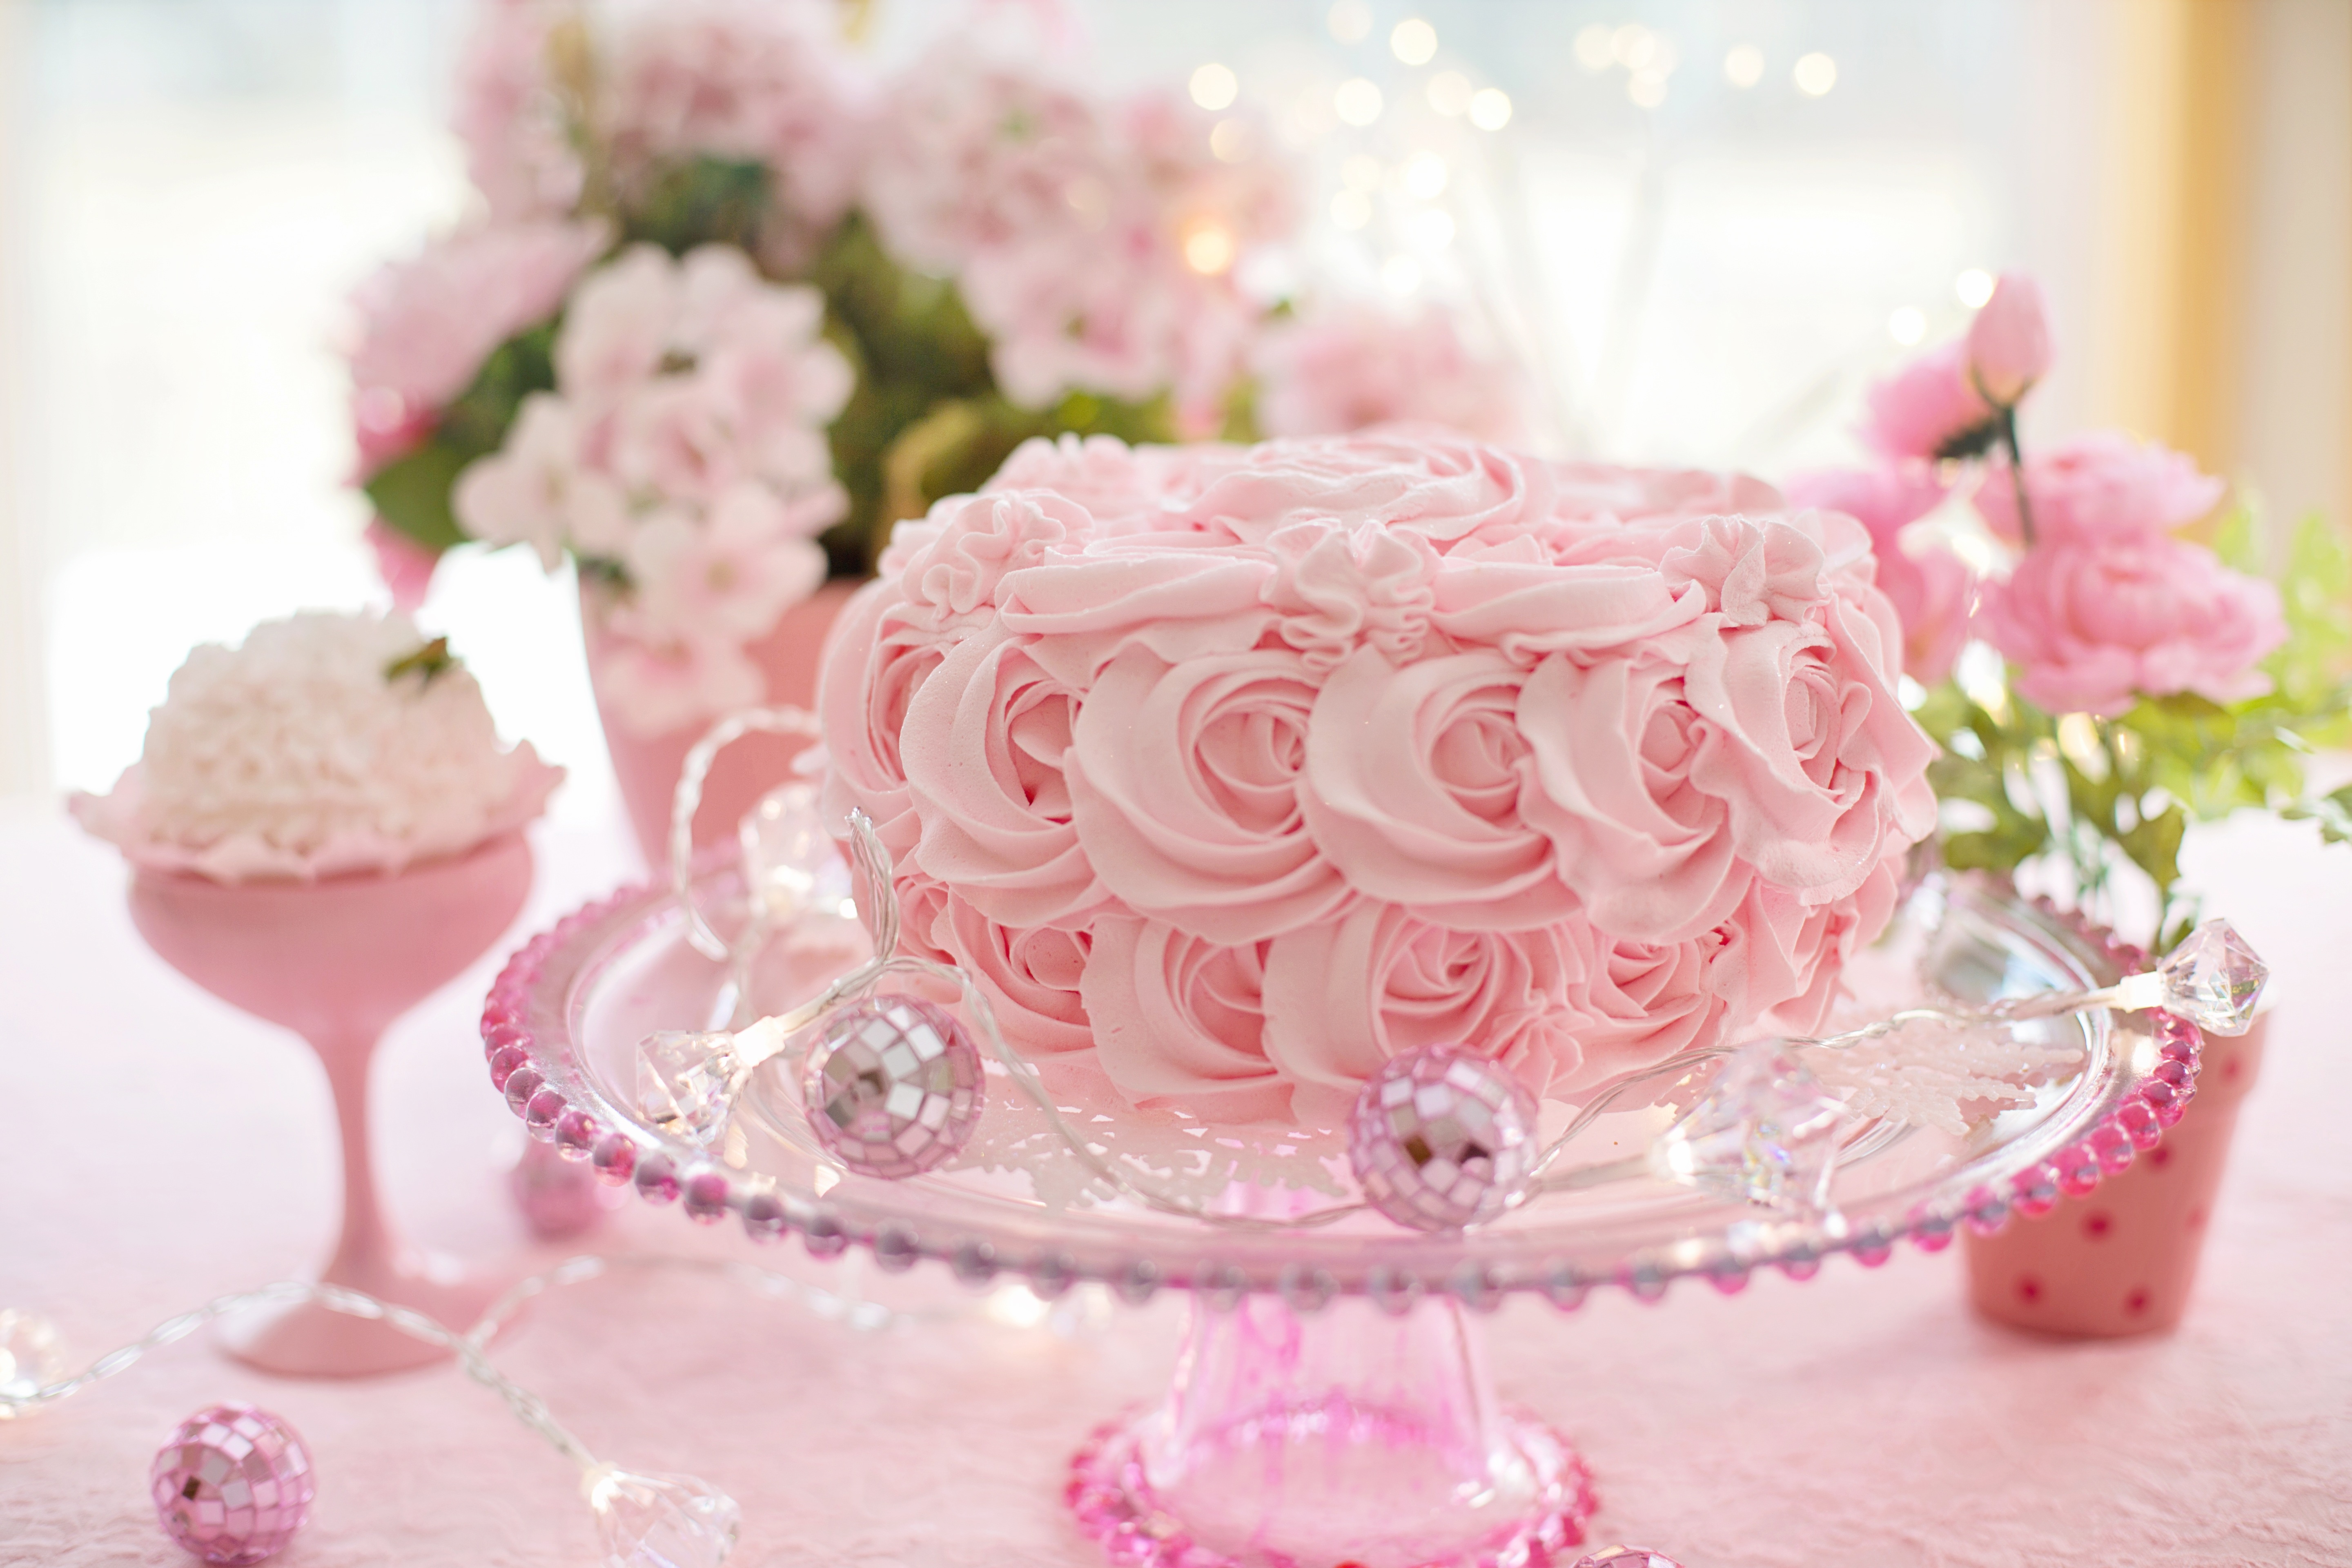 2019Food___Cakes_and_Sweet_Beautiful_pink_cake_on_a_table_with_flowers_135921_.jpg